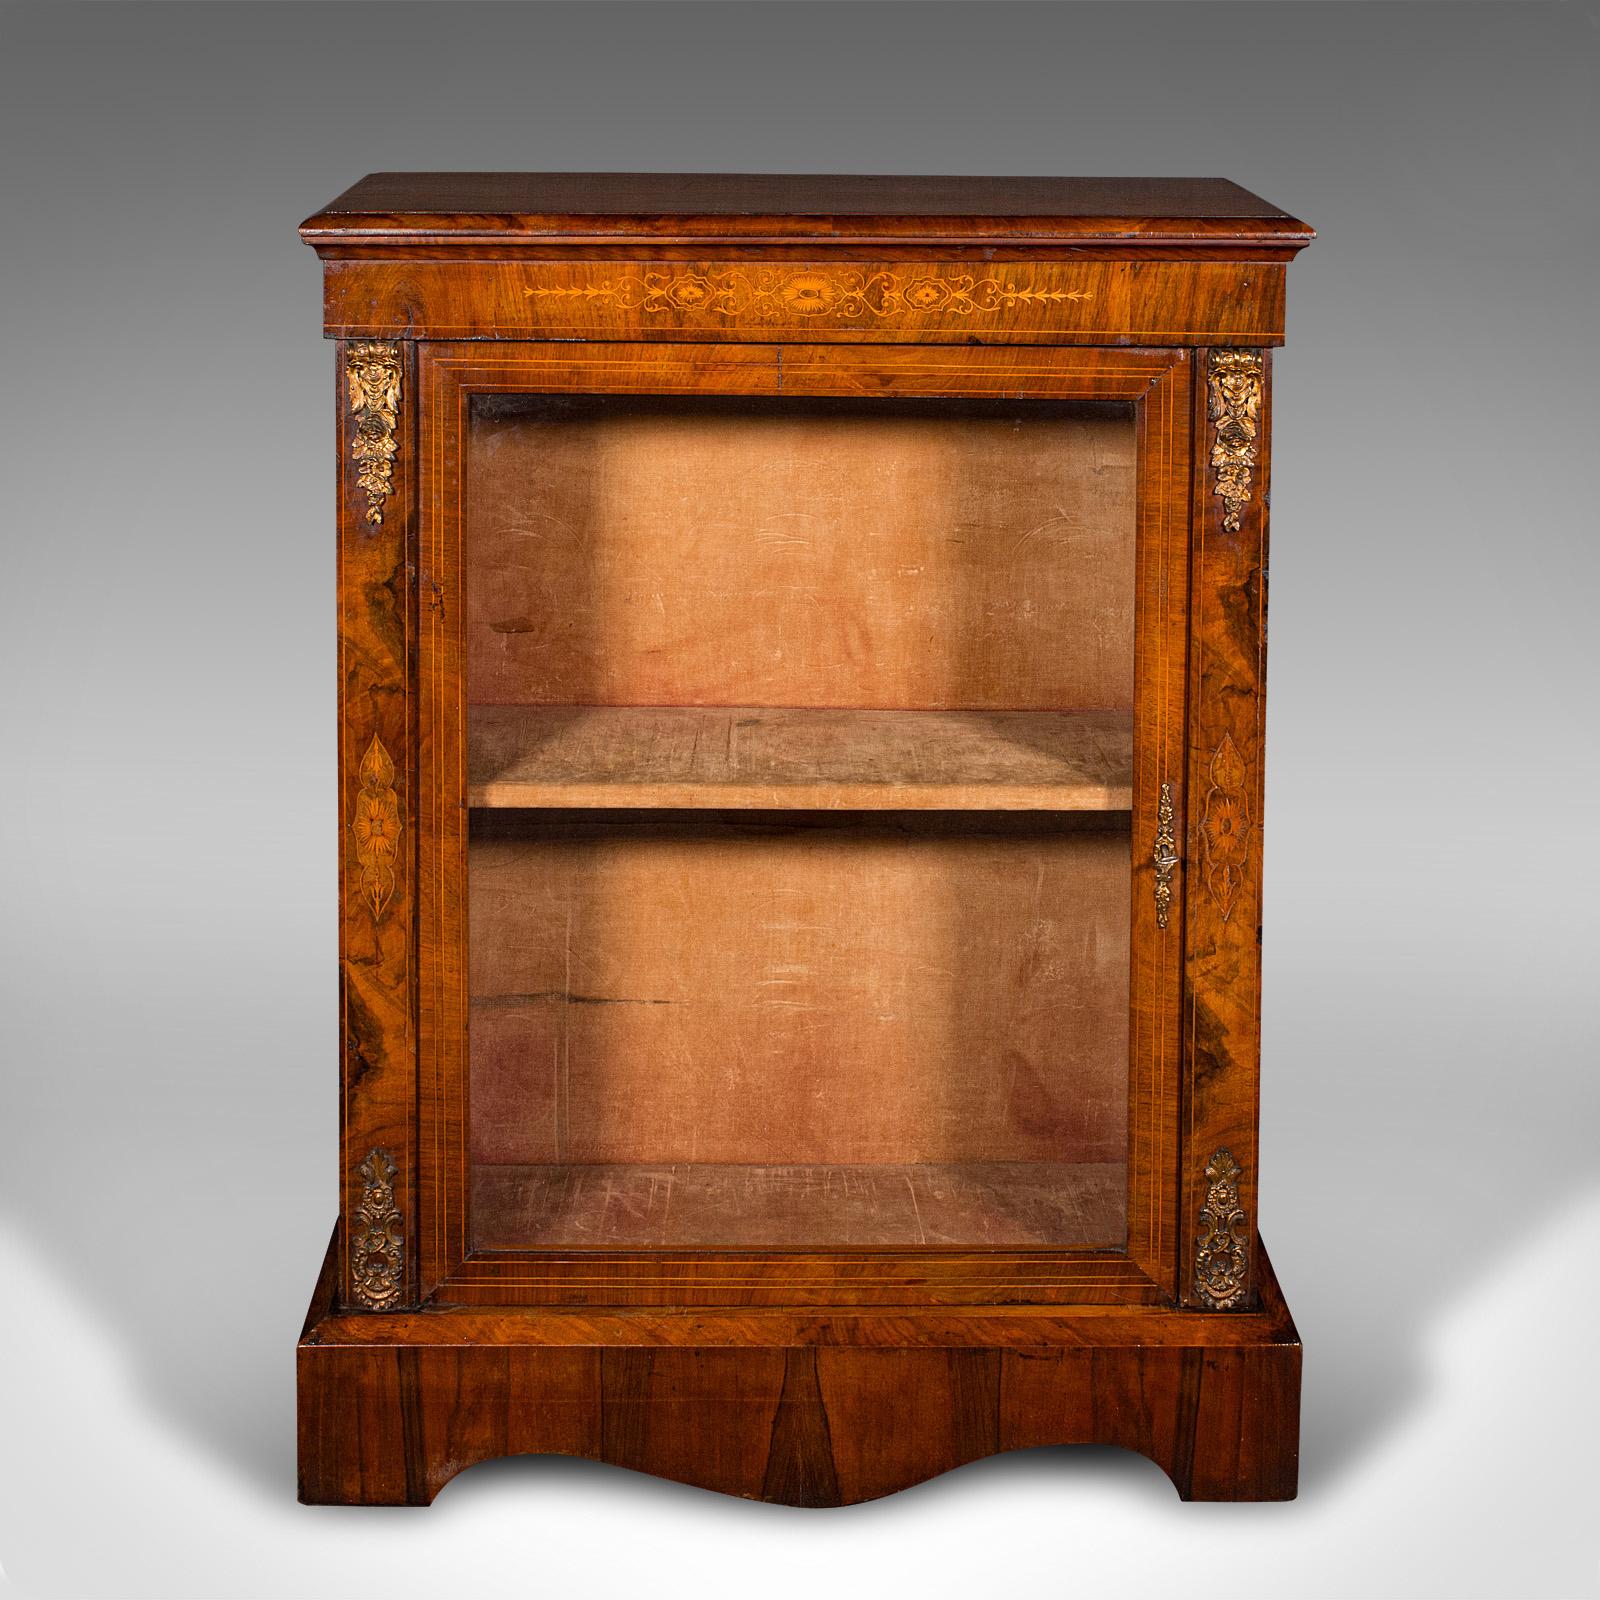 This is an antique pier cabinet. An English, walnut and boxwood inlaid display cupboard, dating to the Regency period, circa 1820.

An attractive cabinet, presenting beautifully with fine colour
Displaying a desirable aged patina and in good